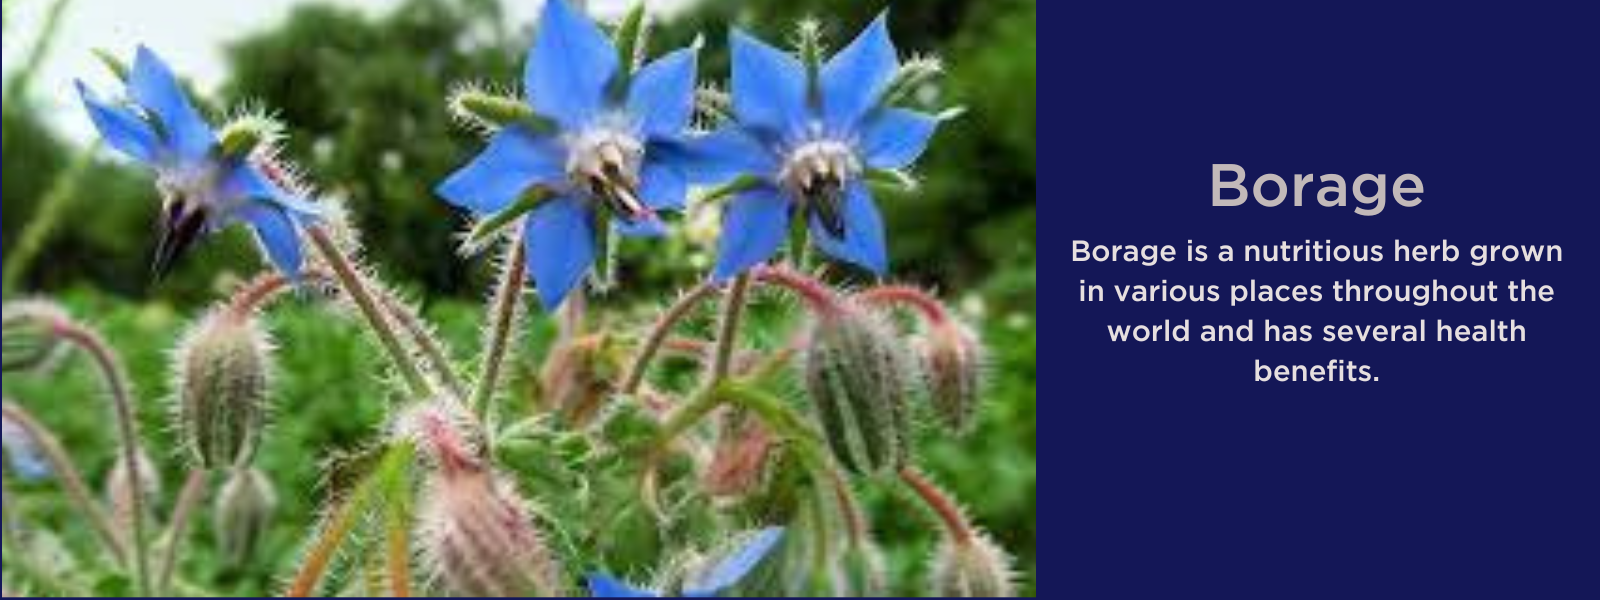 Borage - Health Benefits, Uses and Important Facts